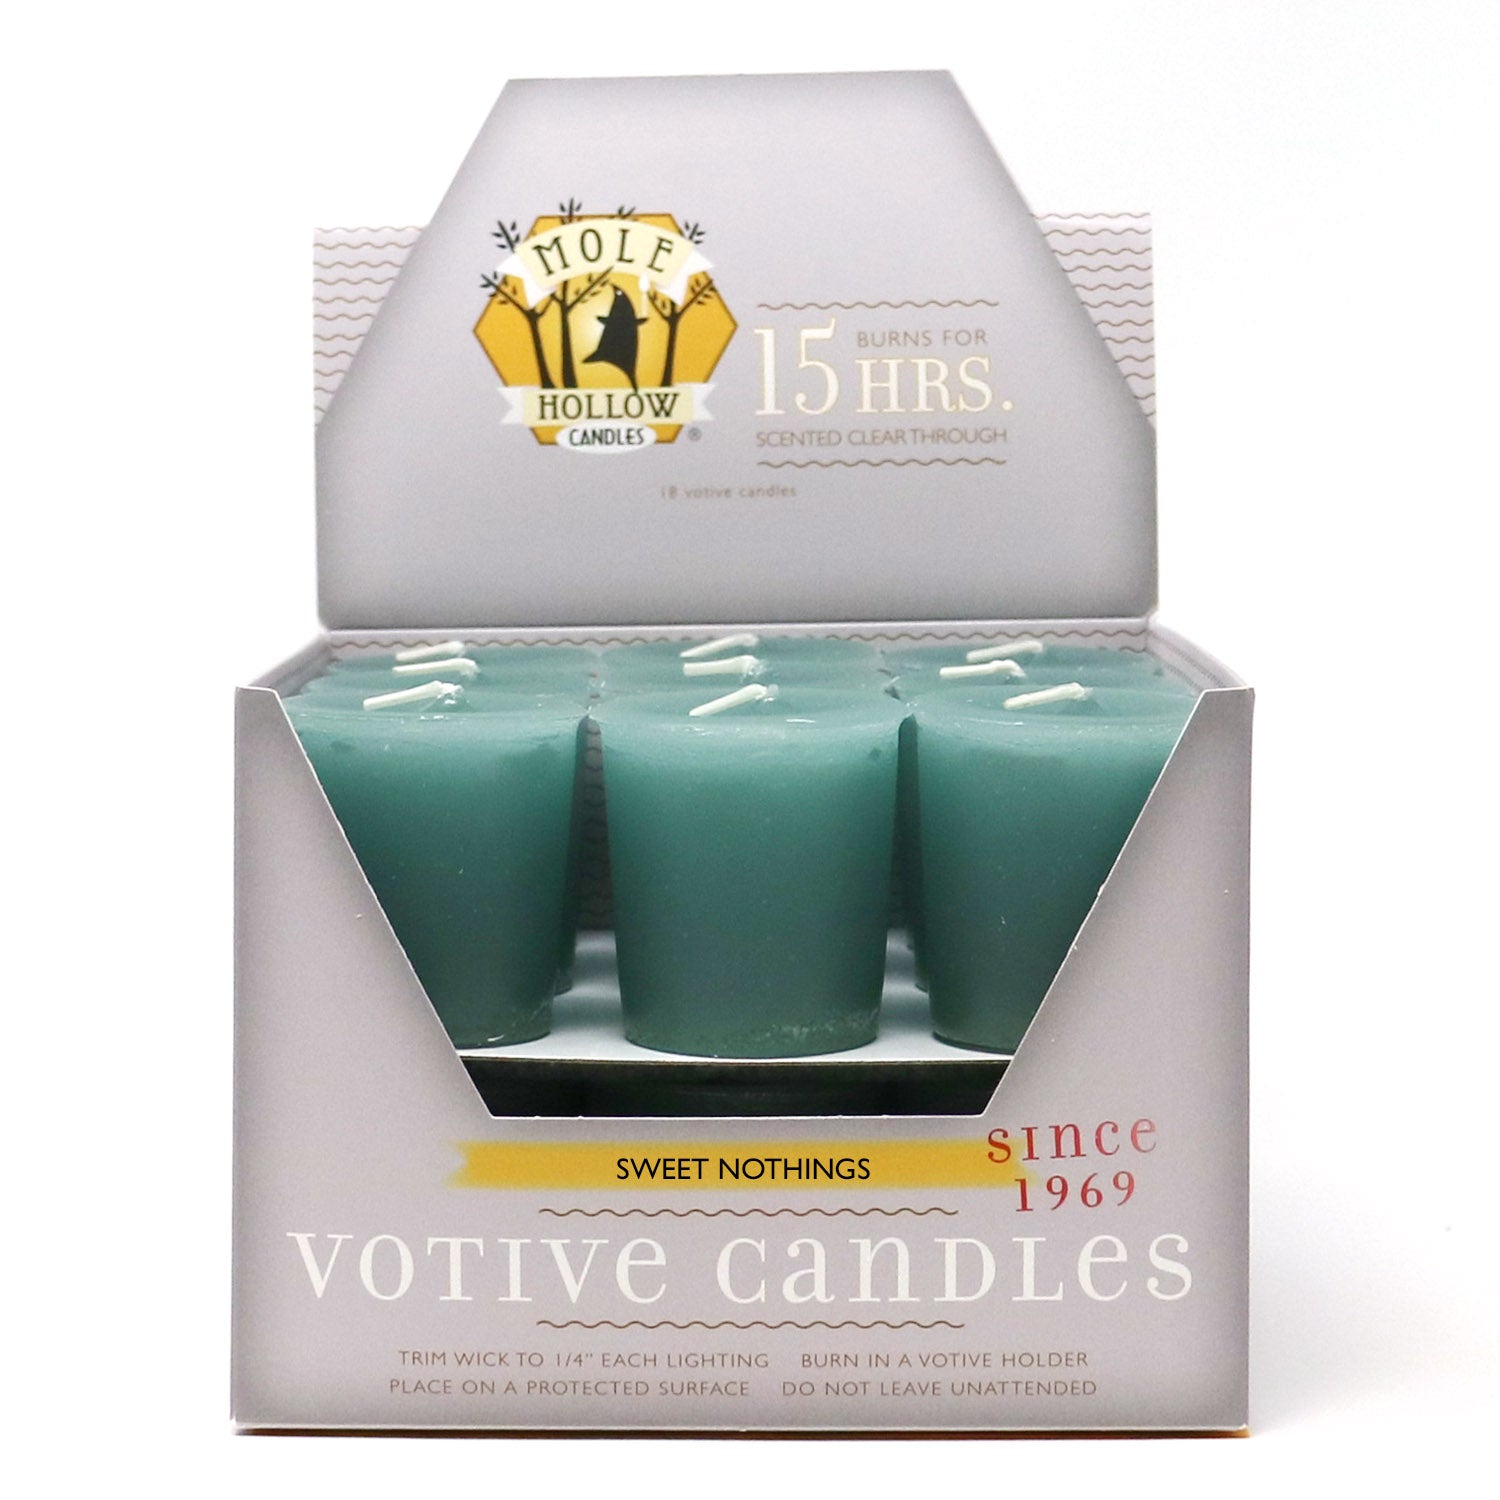 Sweet Nothings Votive Candles, Box of 18